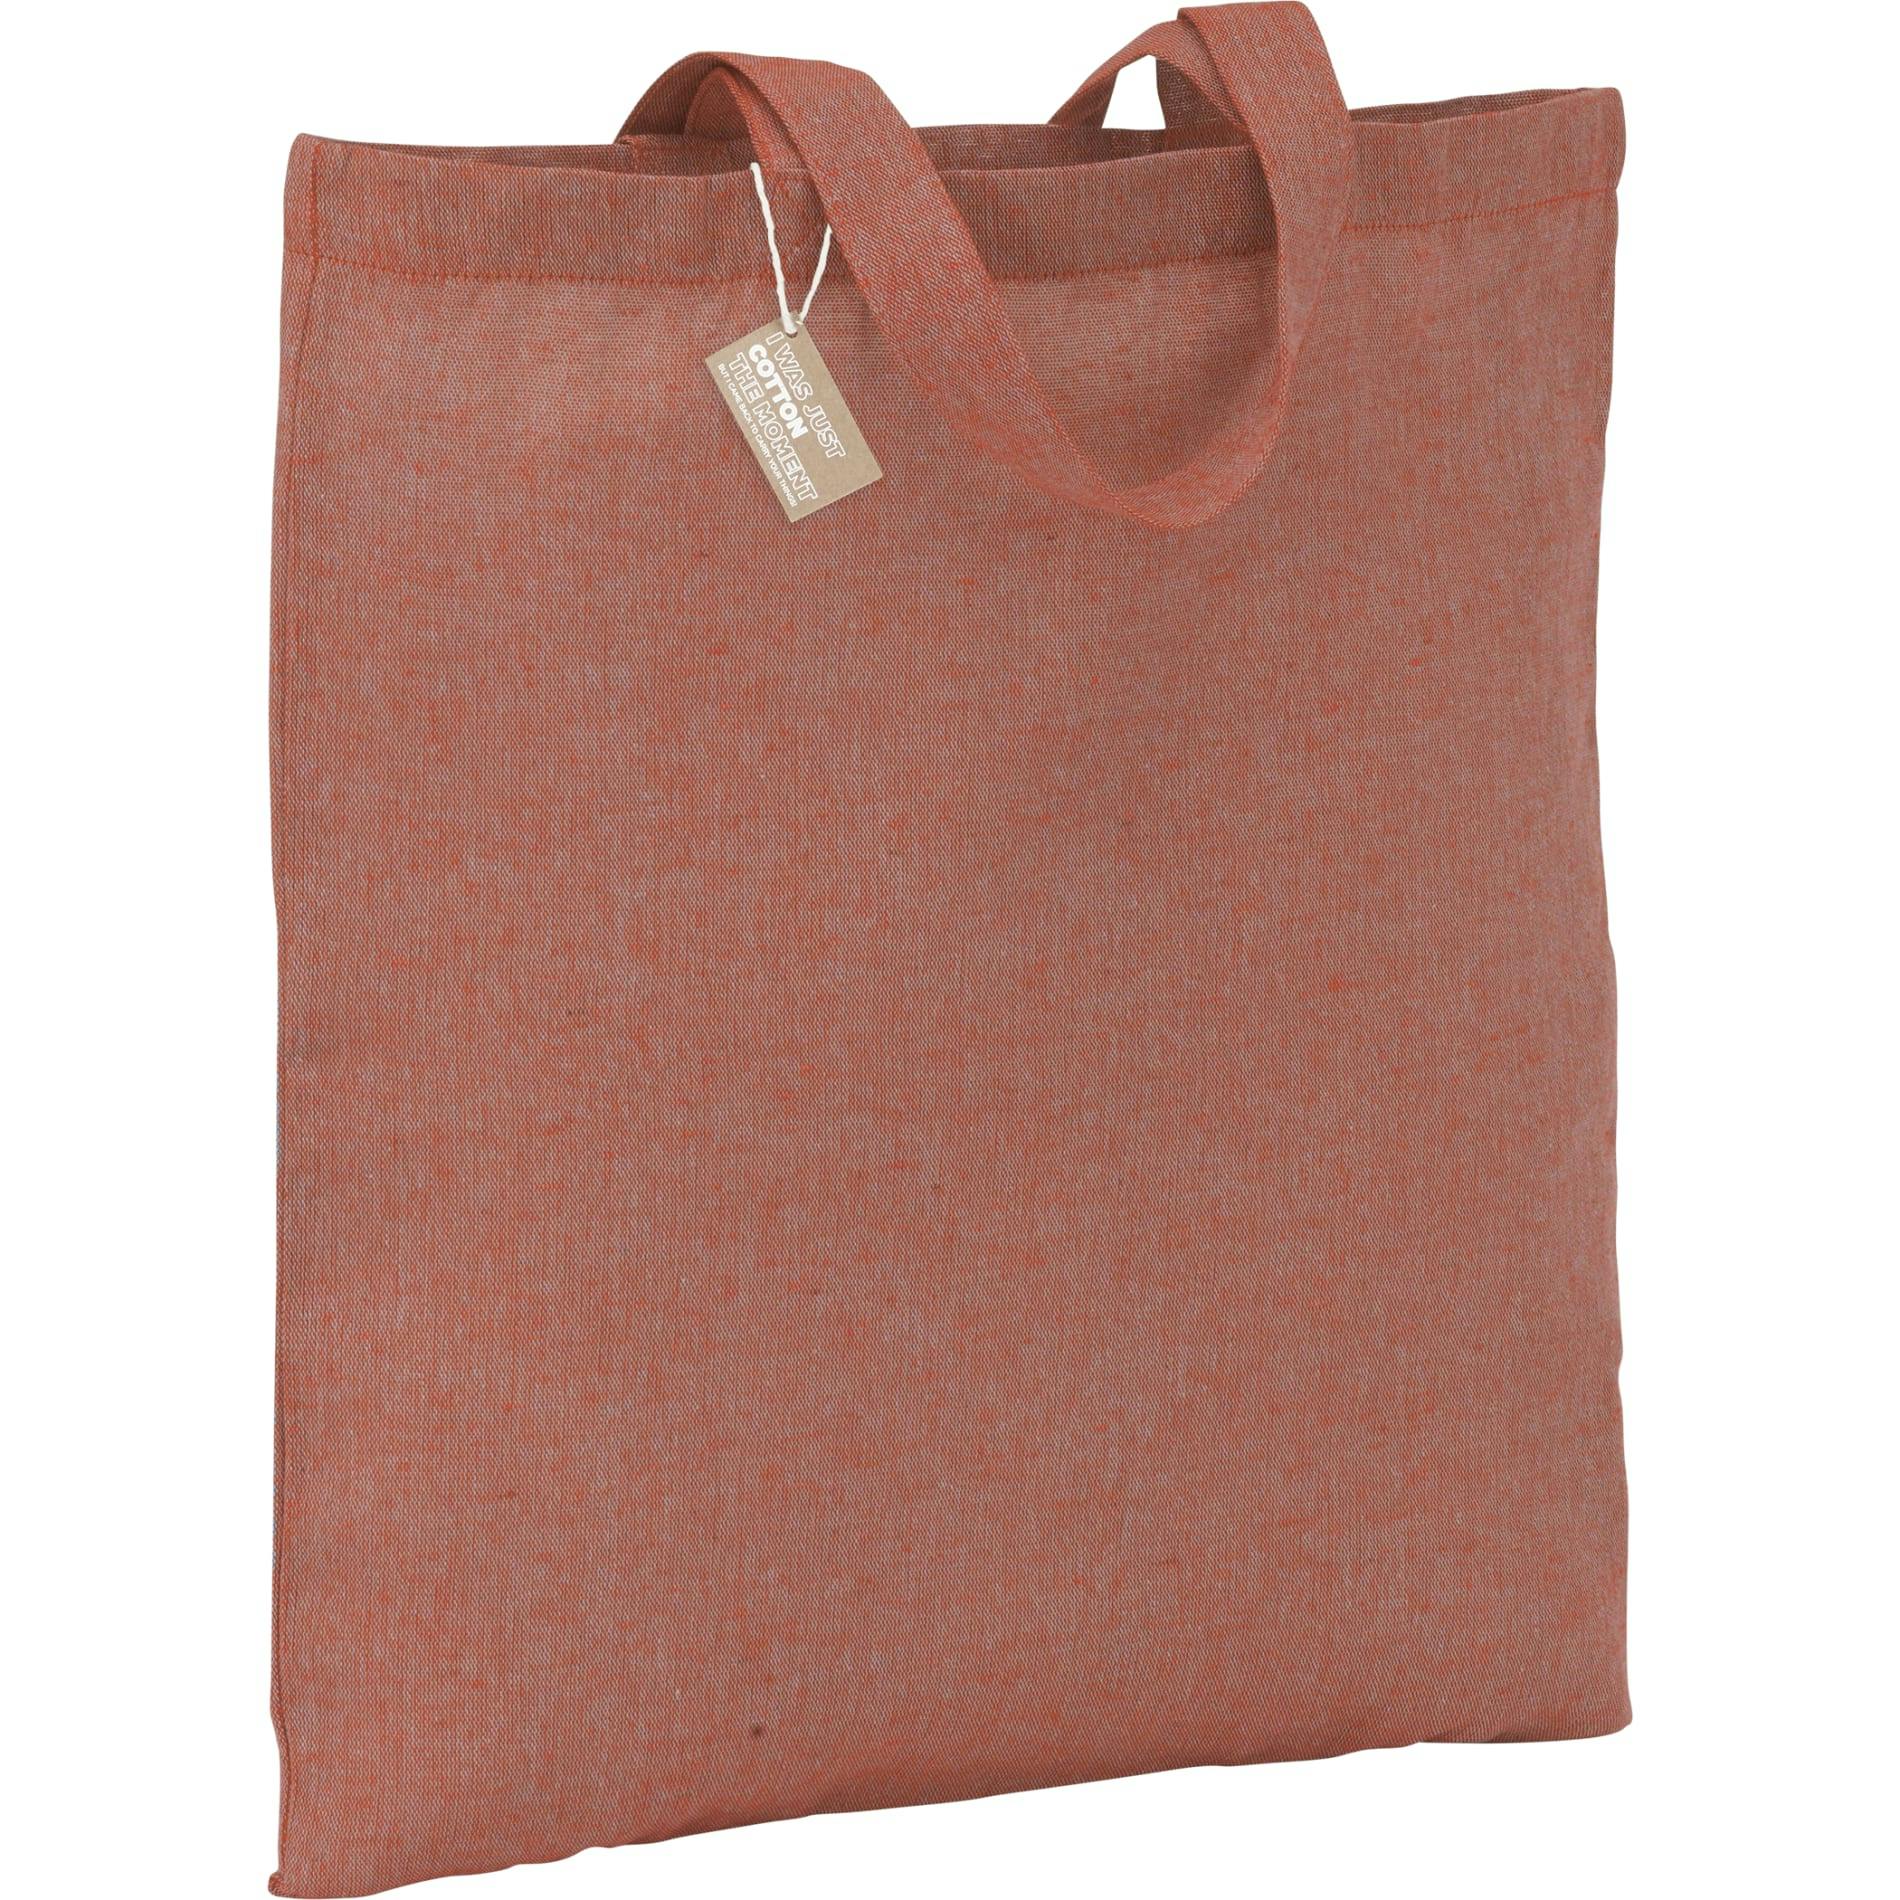 Recycled 5oz Cotton Twill Tote - additional Image 3